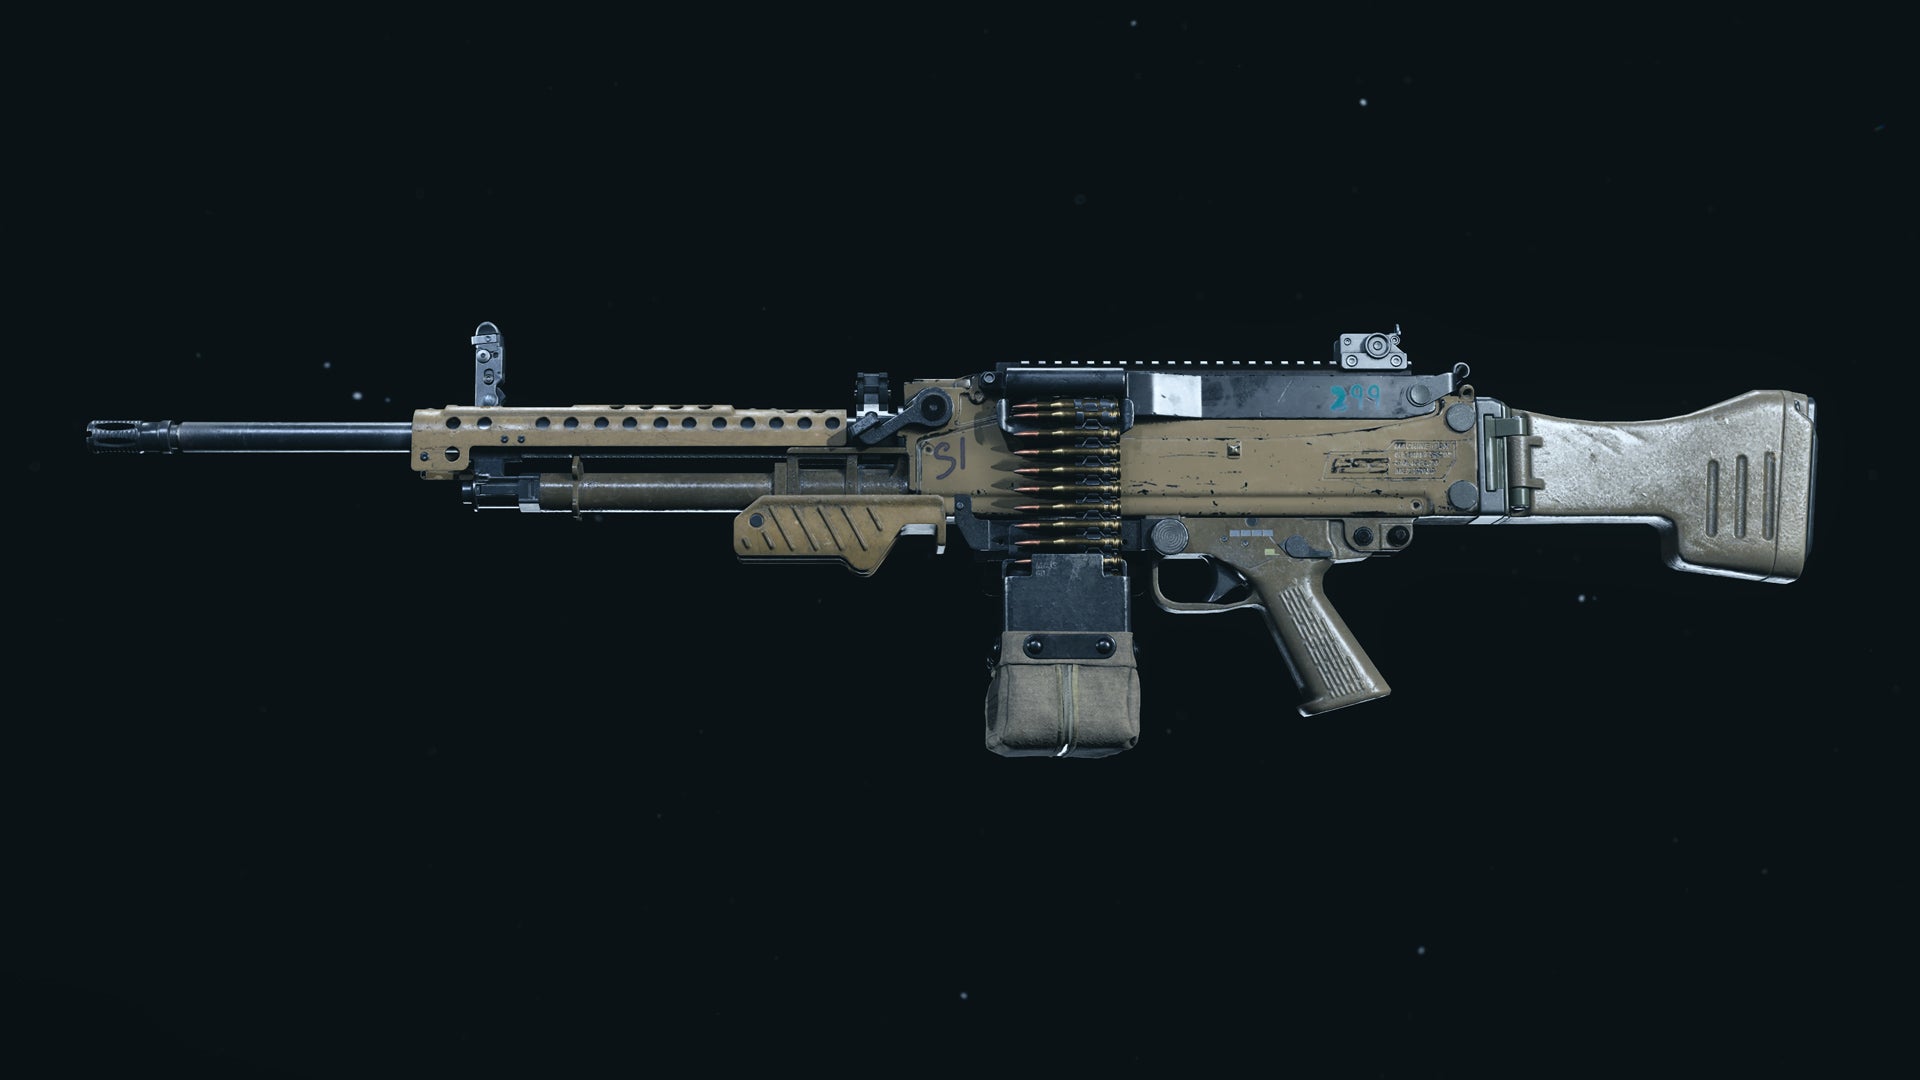 A screenshot of the M91 LMG as it appears in the Call of Duty: Warzone Gunsmith.